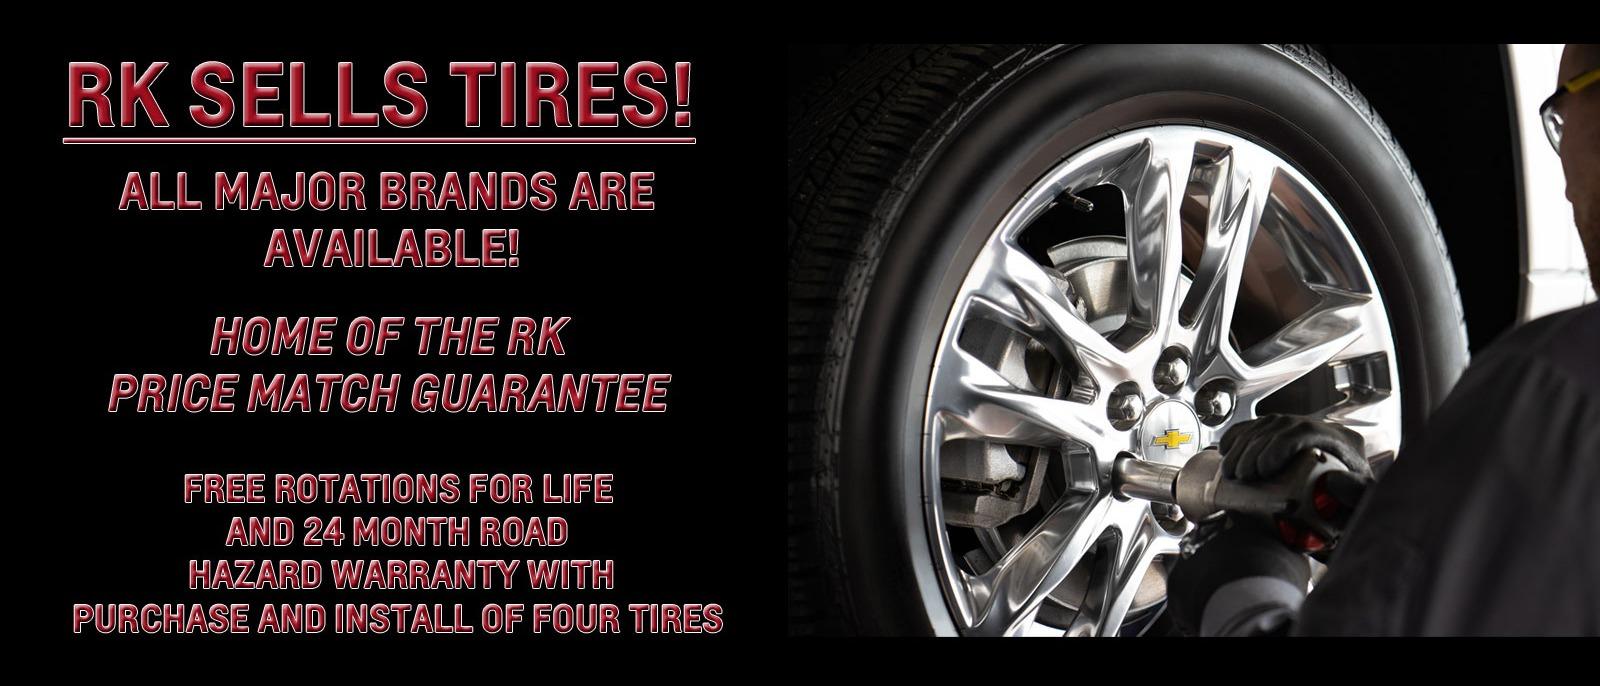 We sell Tires